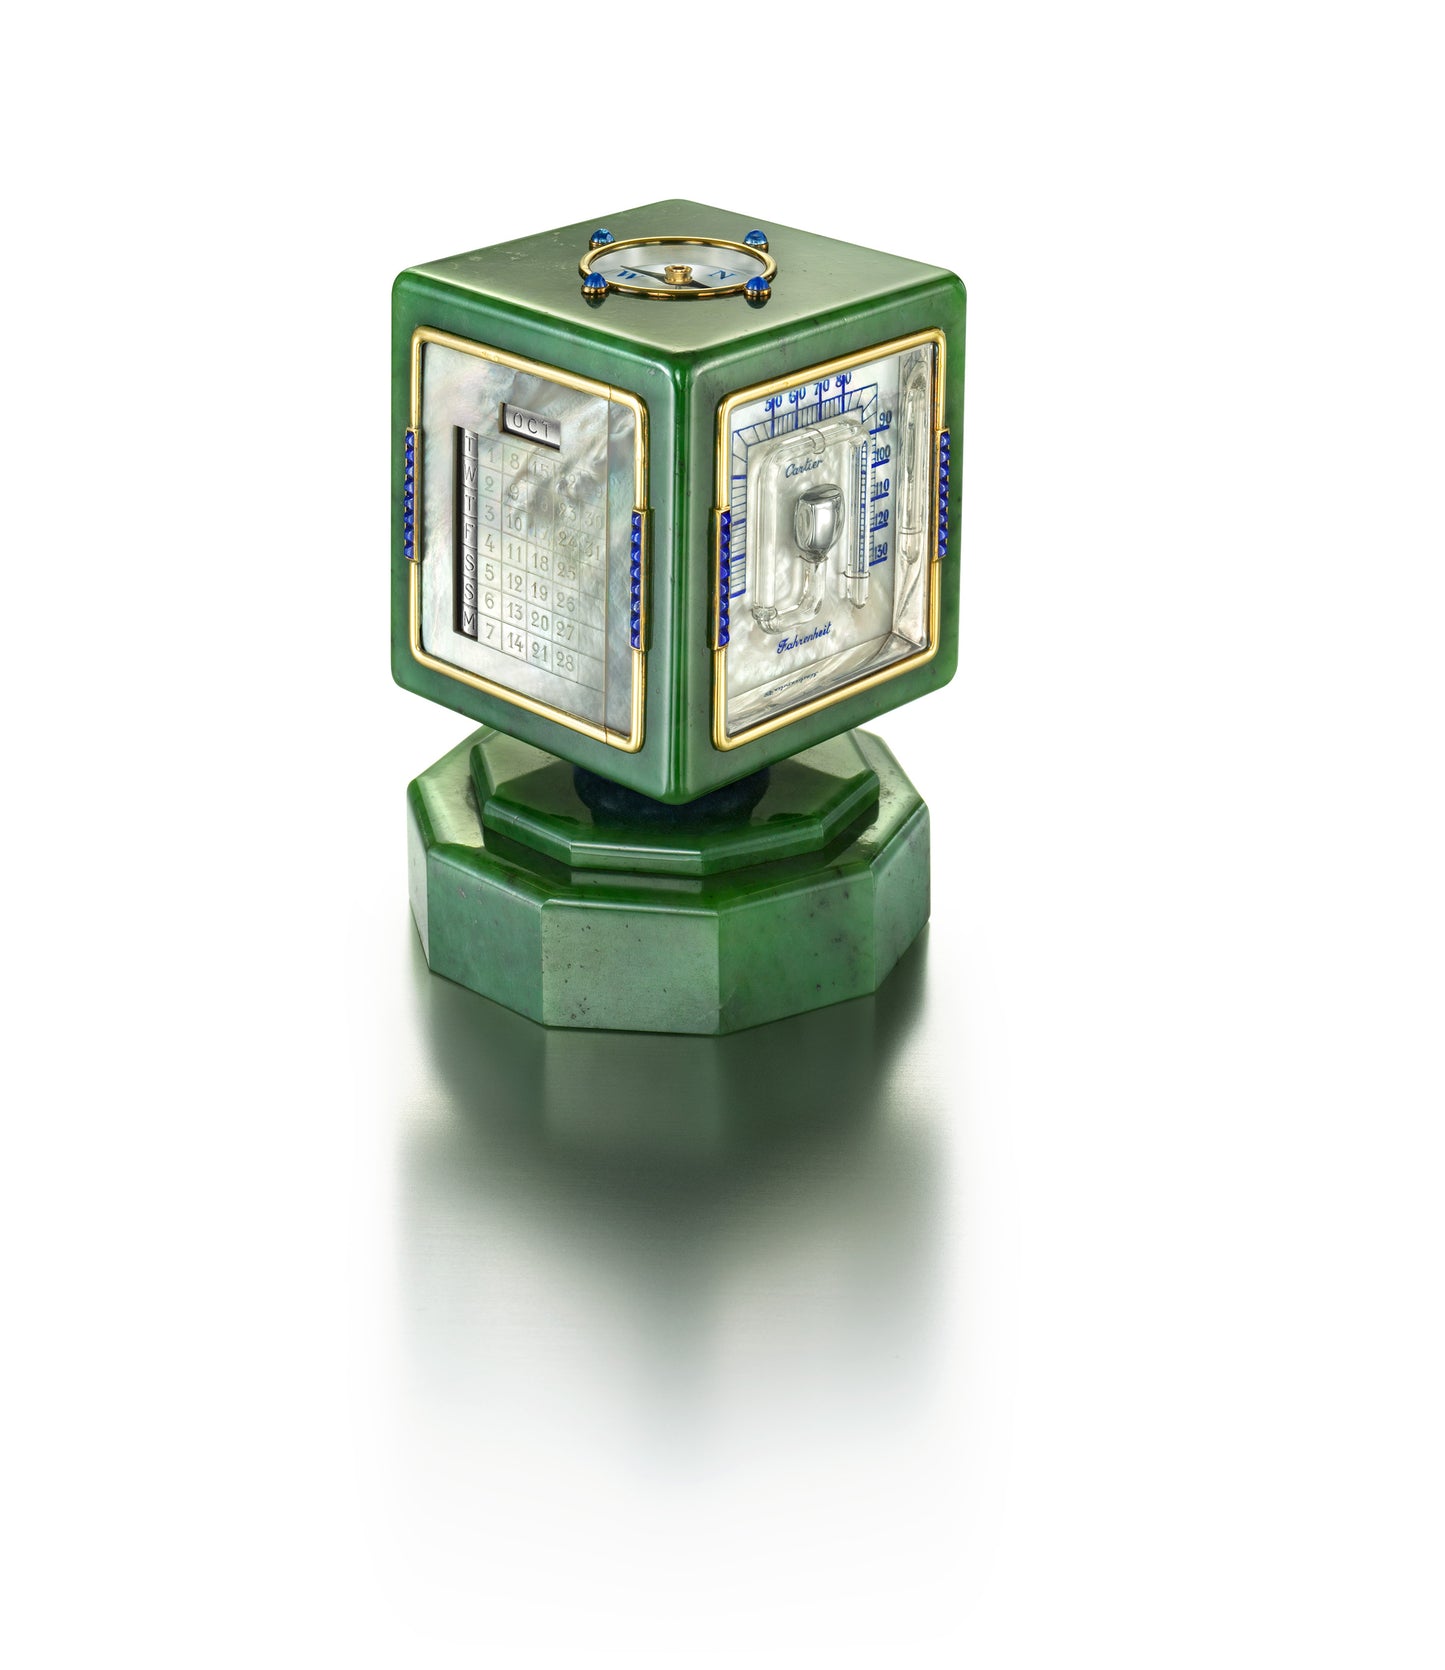 ART  DECO  NEPHRITE  JADE,  SAPPHIRE,  AND  MOTHER-OF-PEARL  REVOLVING  DESK  CLOCK WITH  CALENDAR,  BAROMETER,  THERMOMETER,  AND  COMPASS  BY  CARTIER,  CIRCA  1930